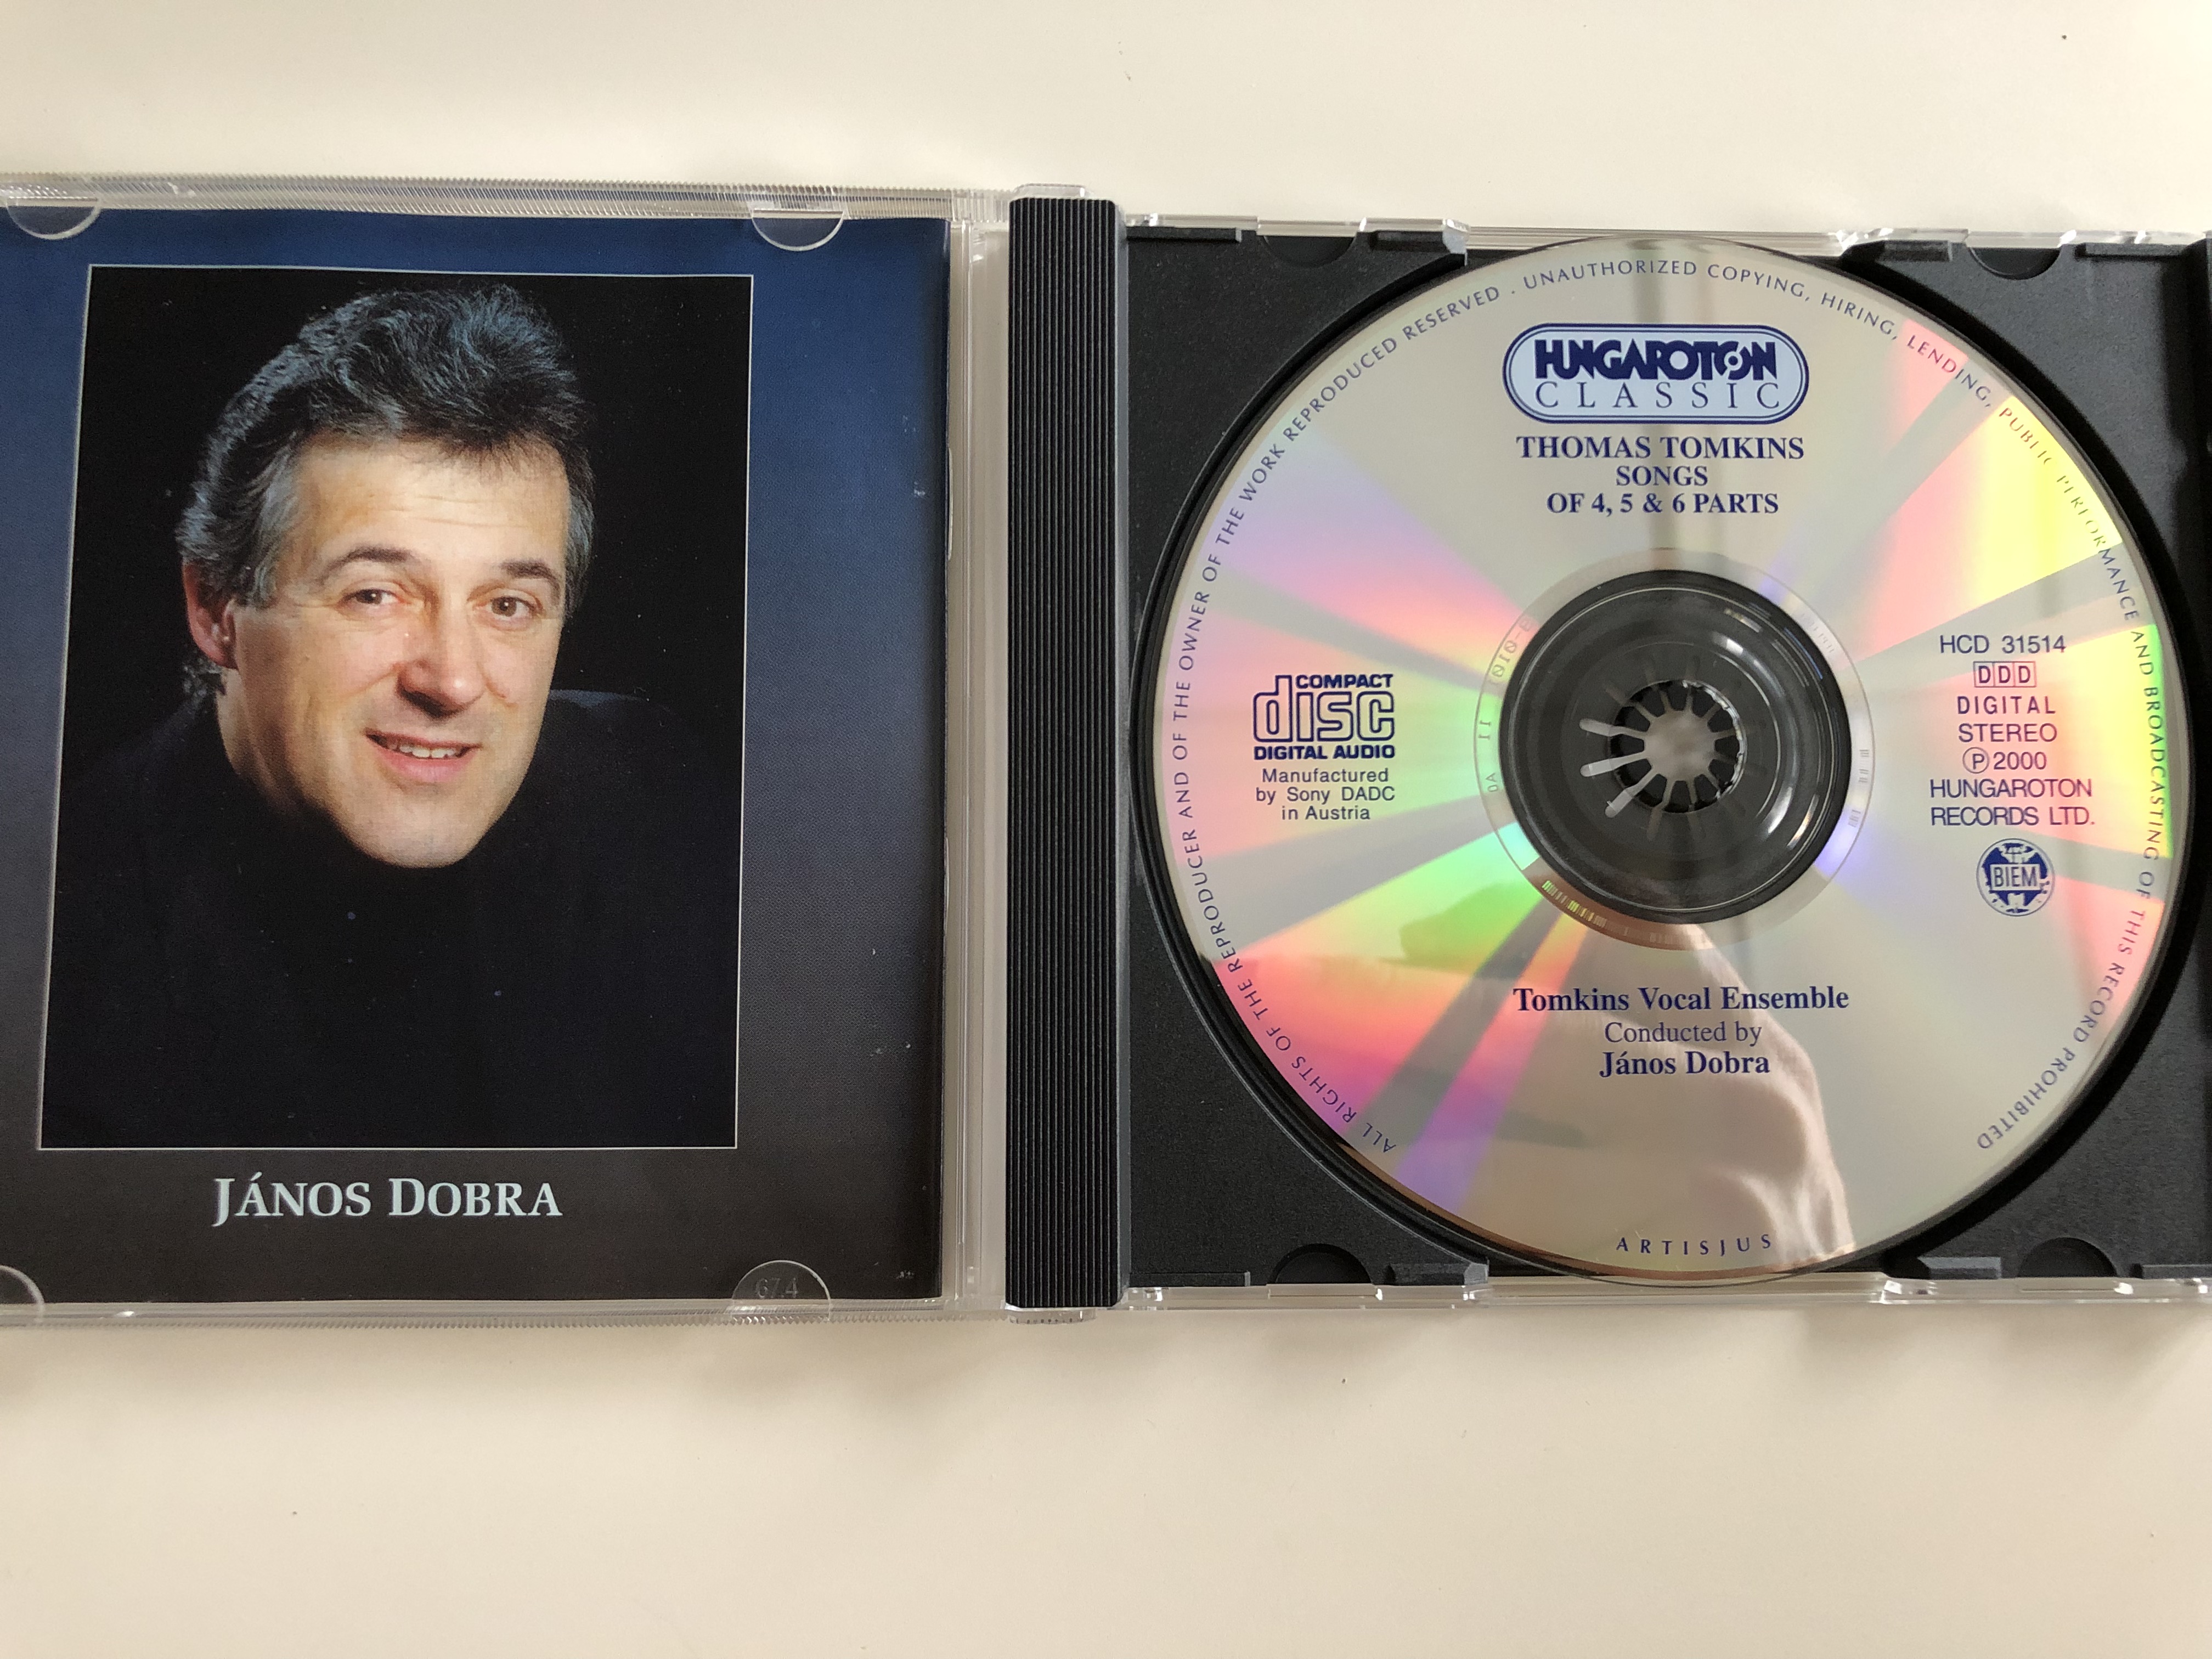 thomas-tomkins-songs-budapest-tomkins-vocal-ensemble-audio-cd-2000-conducted-by-j-nos-dobra-songs-of-4-5-6-parts-hungaroton-classic-hvd-31514-9-.jpg